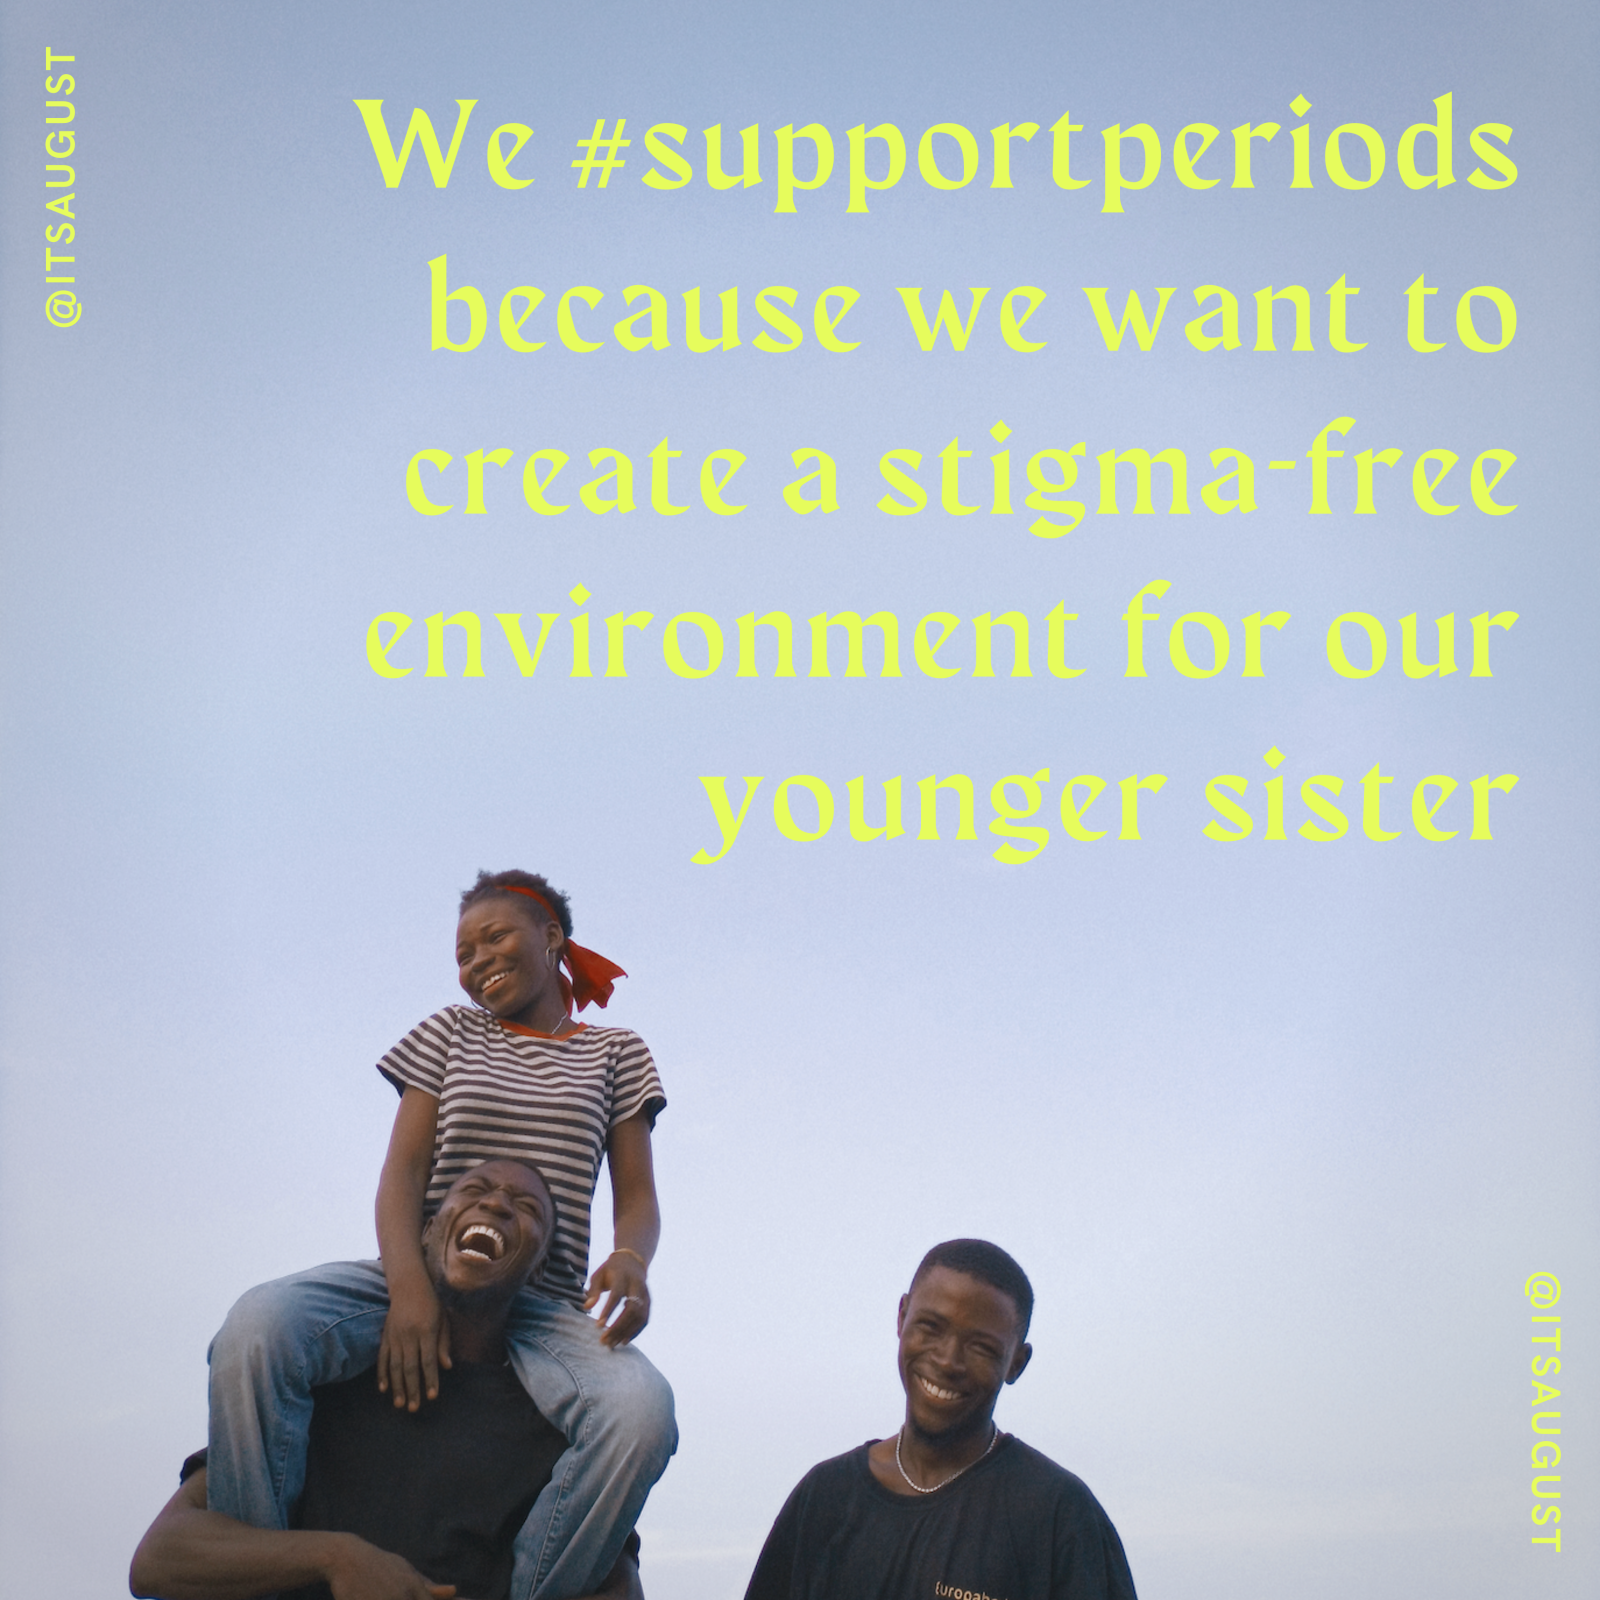 3 smiling people in front of "we #supportperiods because we want to create a stigma-free environment for our younger sister"